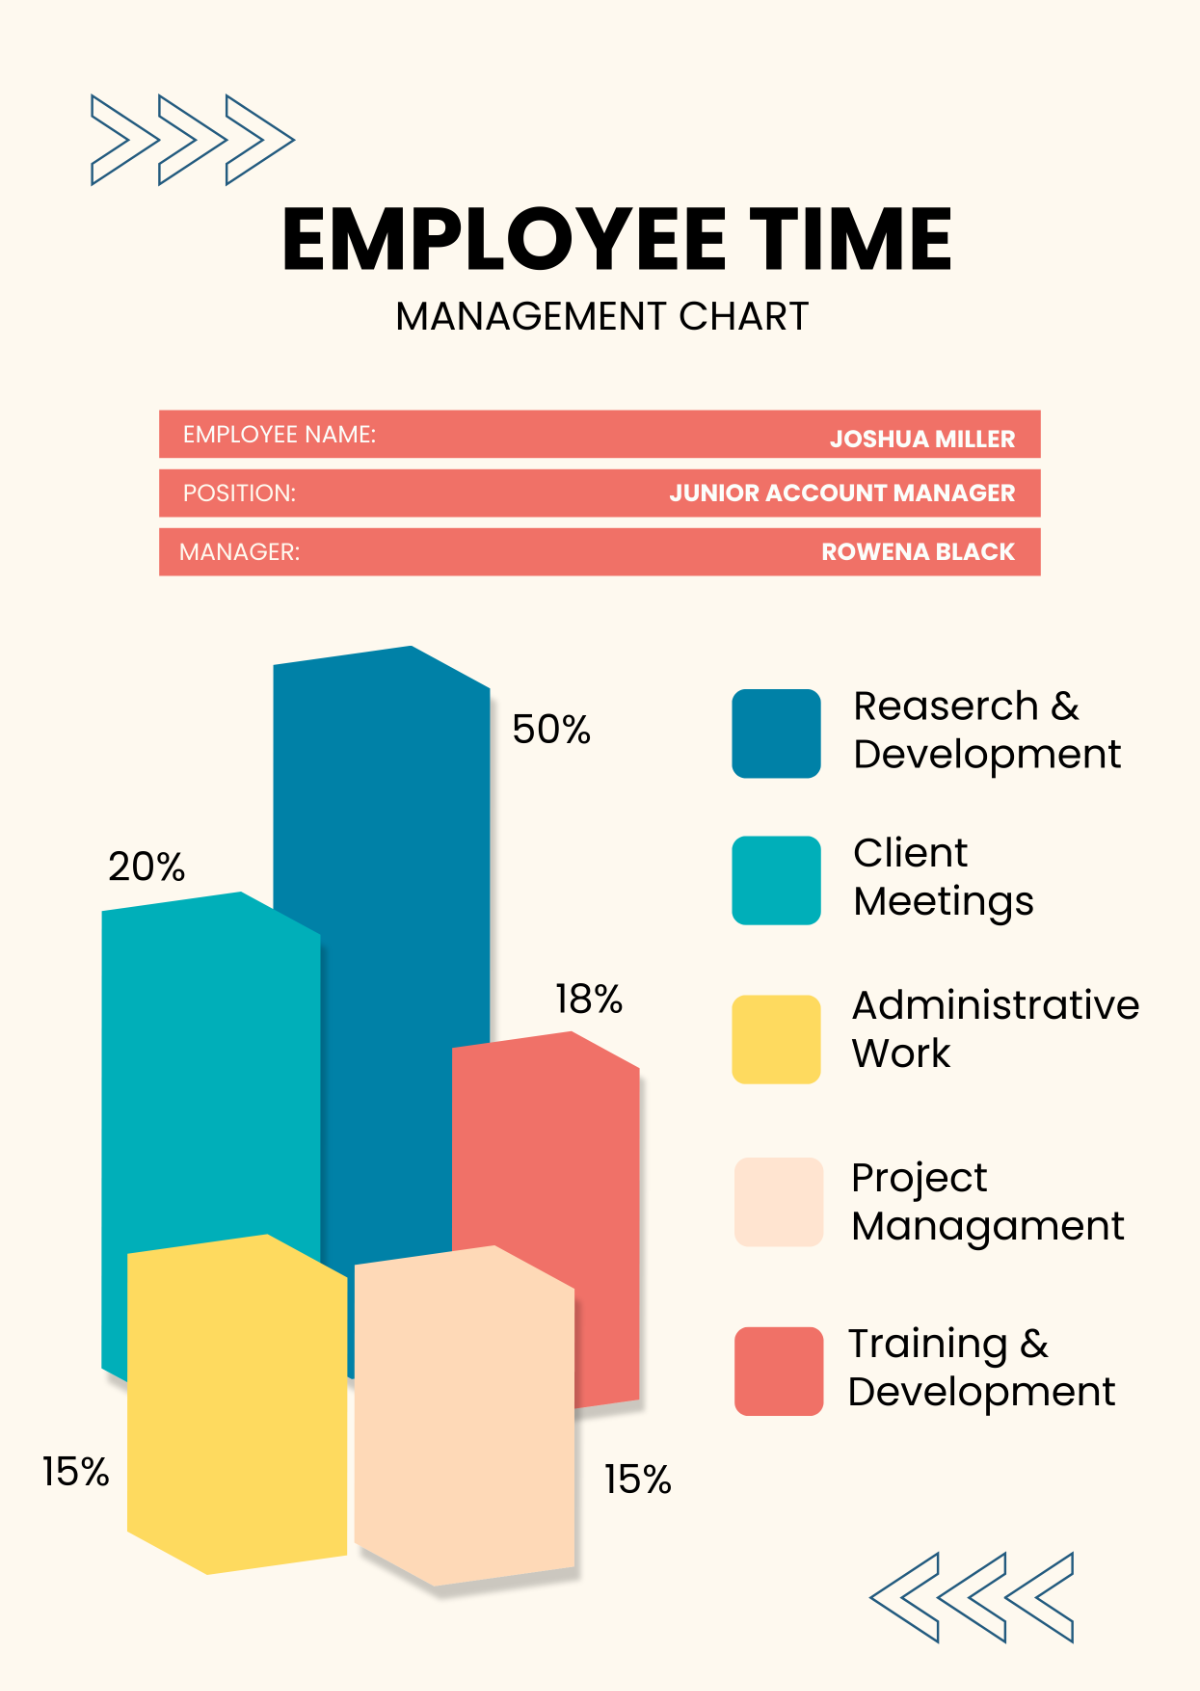 Employee Time Management Chart